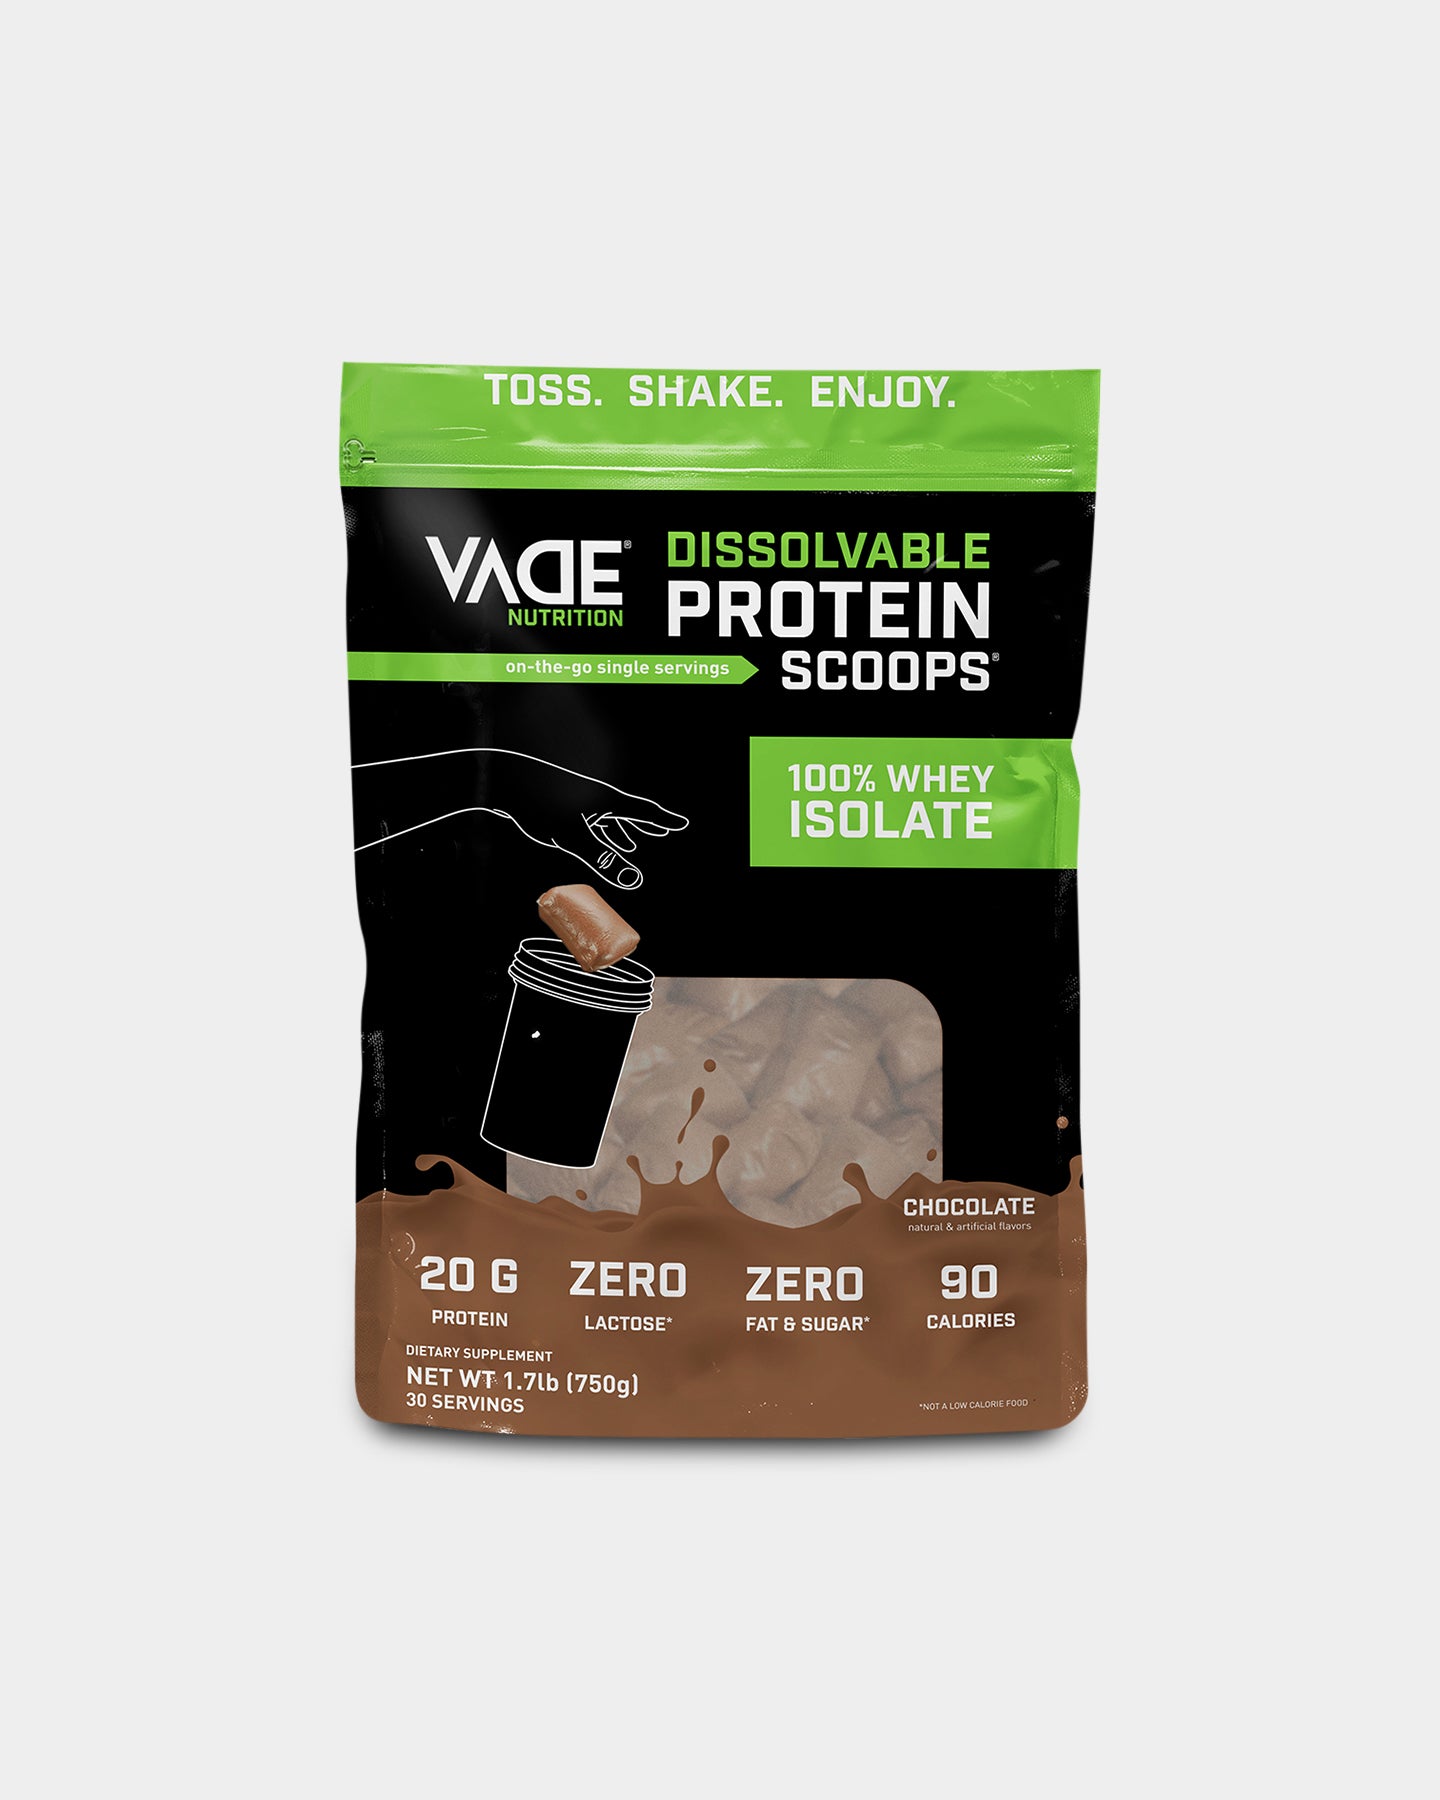 VADE Nutrition 100% Whey Isolate Dissolvable Protein Scoops